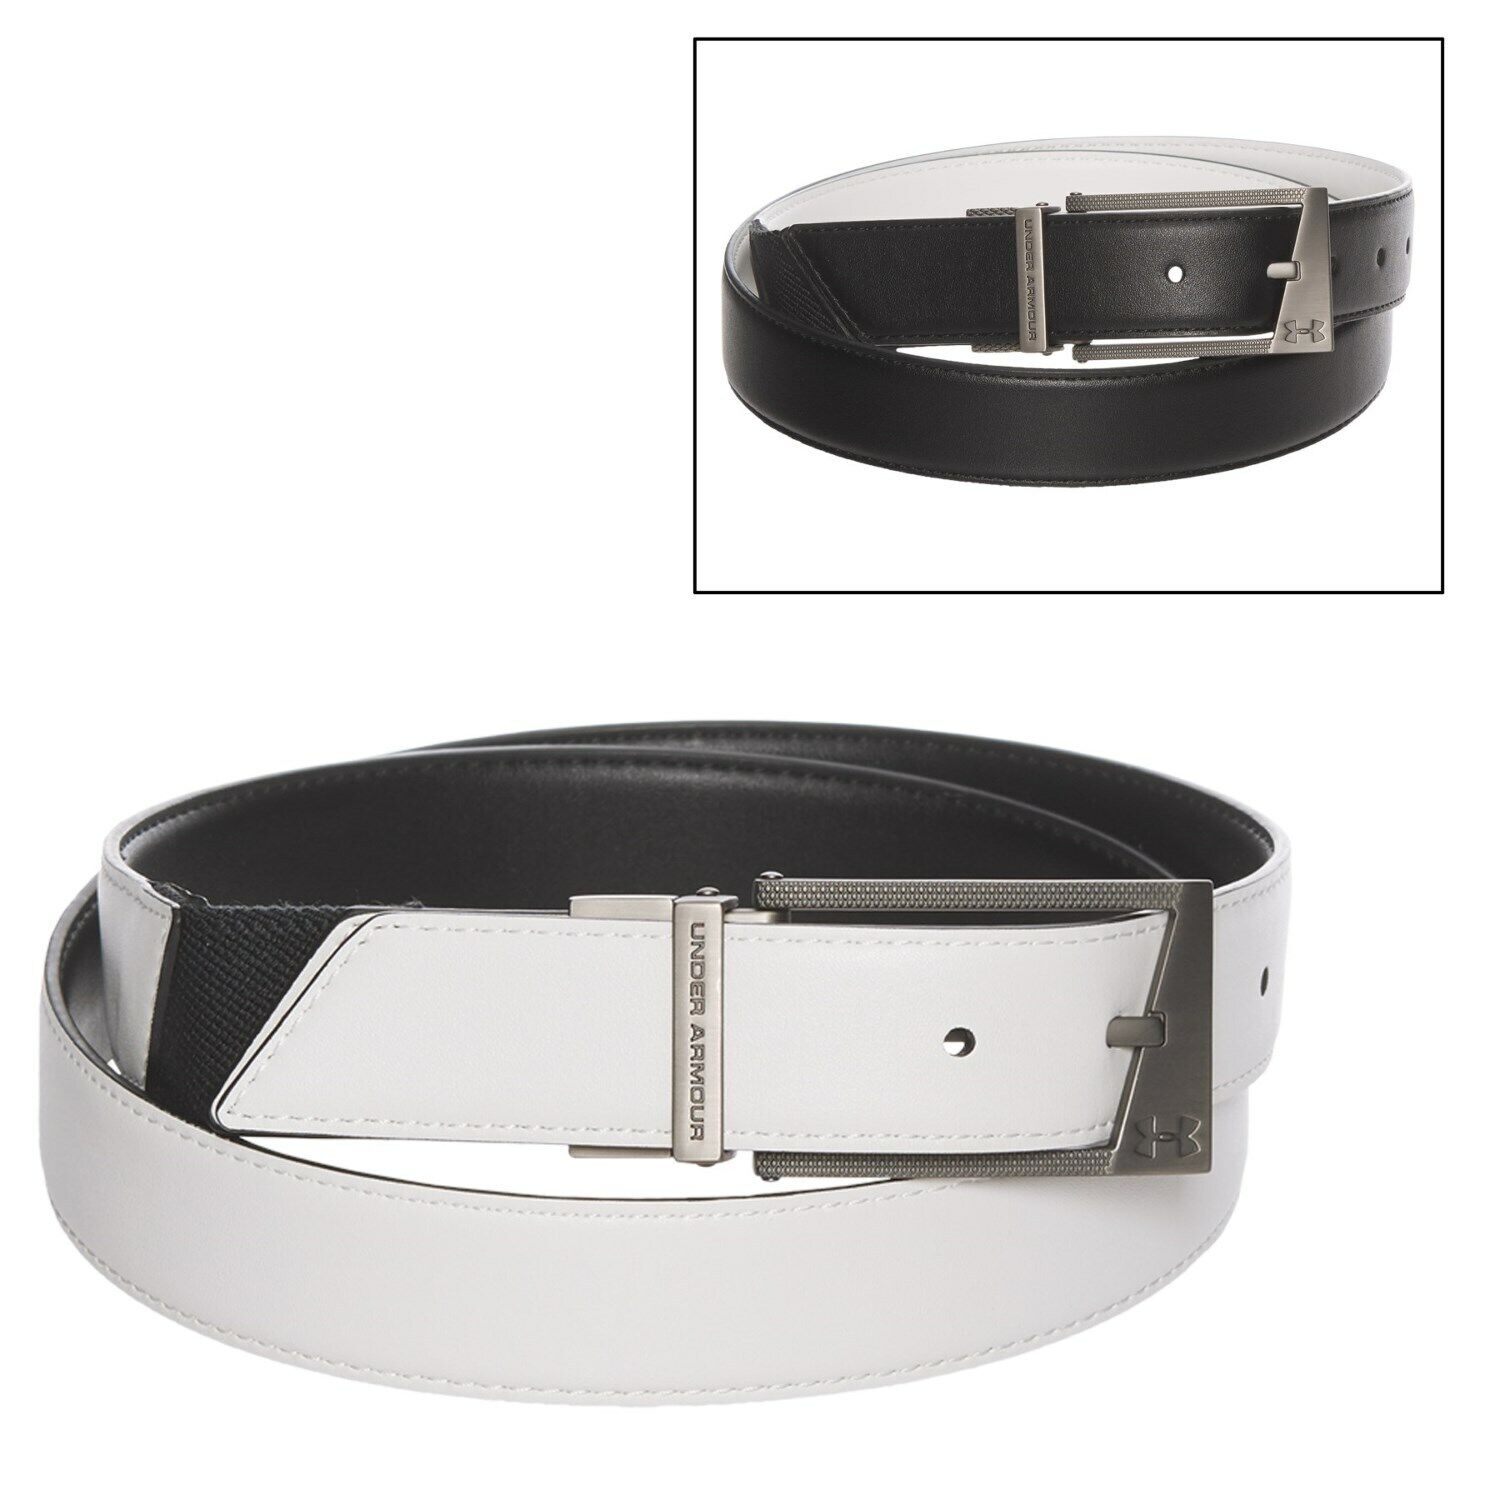 Under Armour Golf Belt 40 Black White Reversible PU Leather Metal Buckle MSRP$35